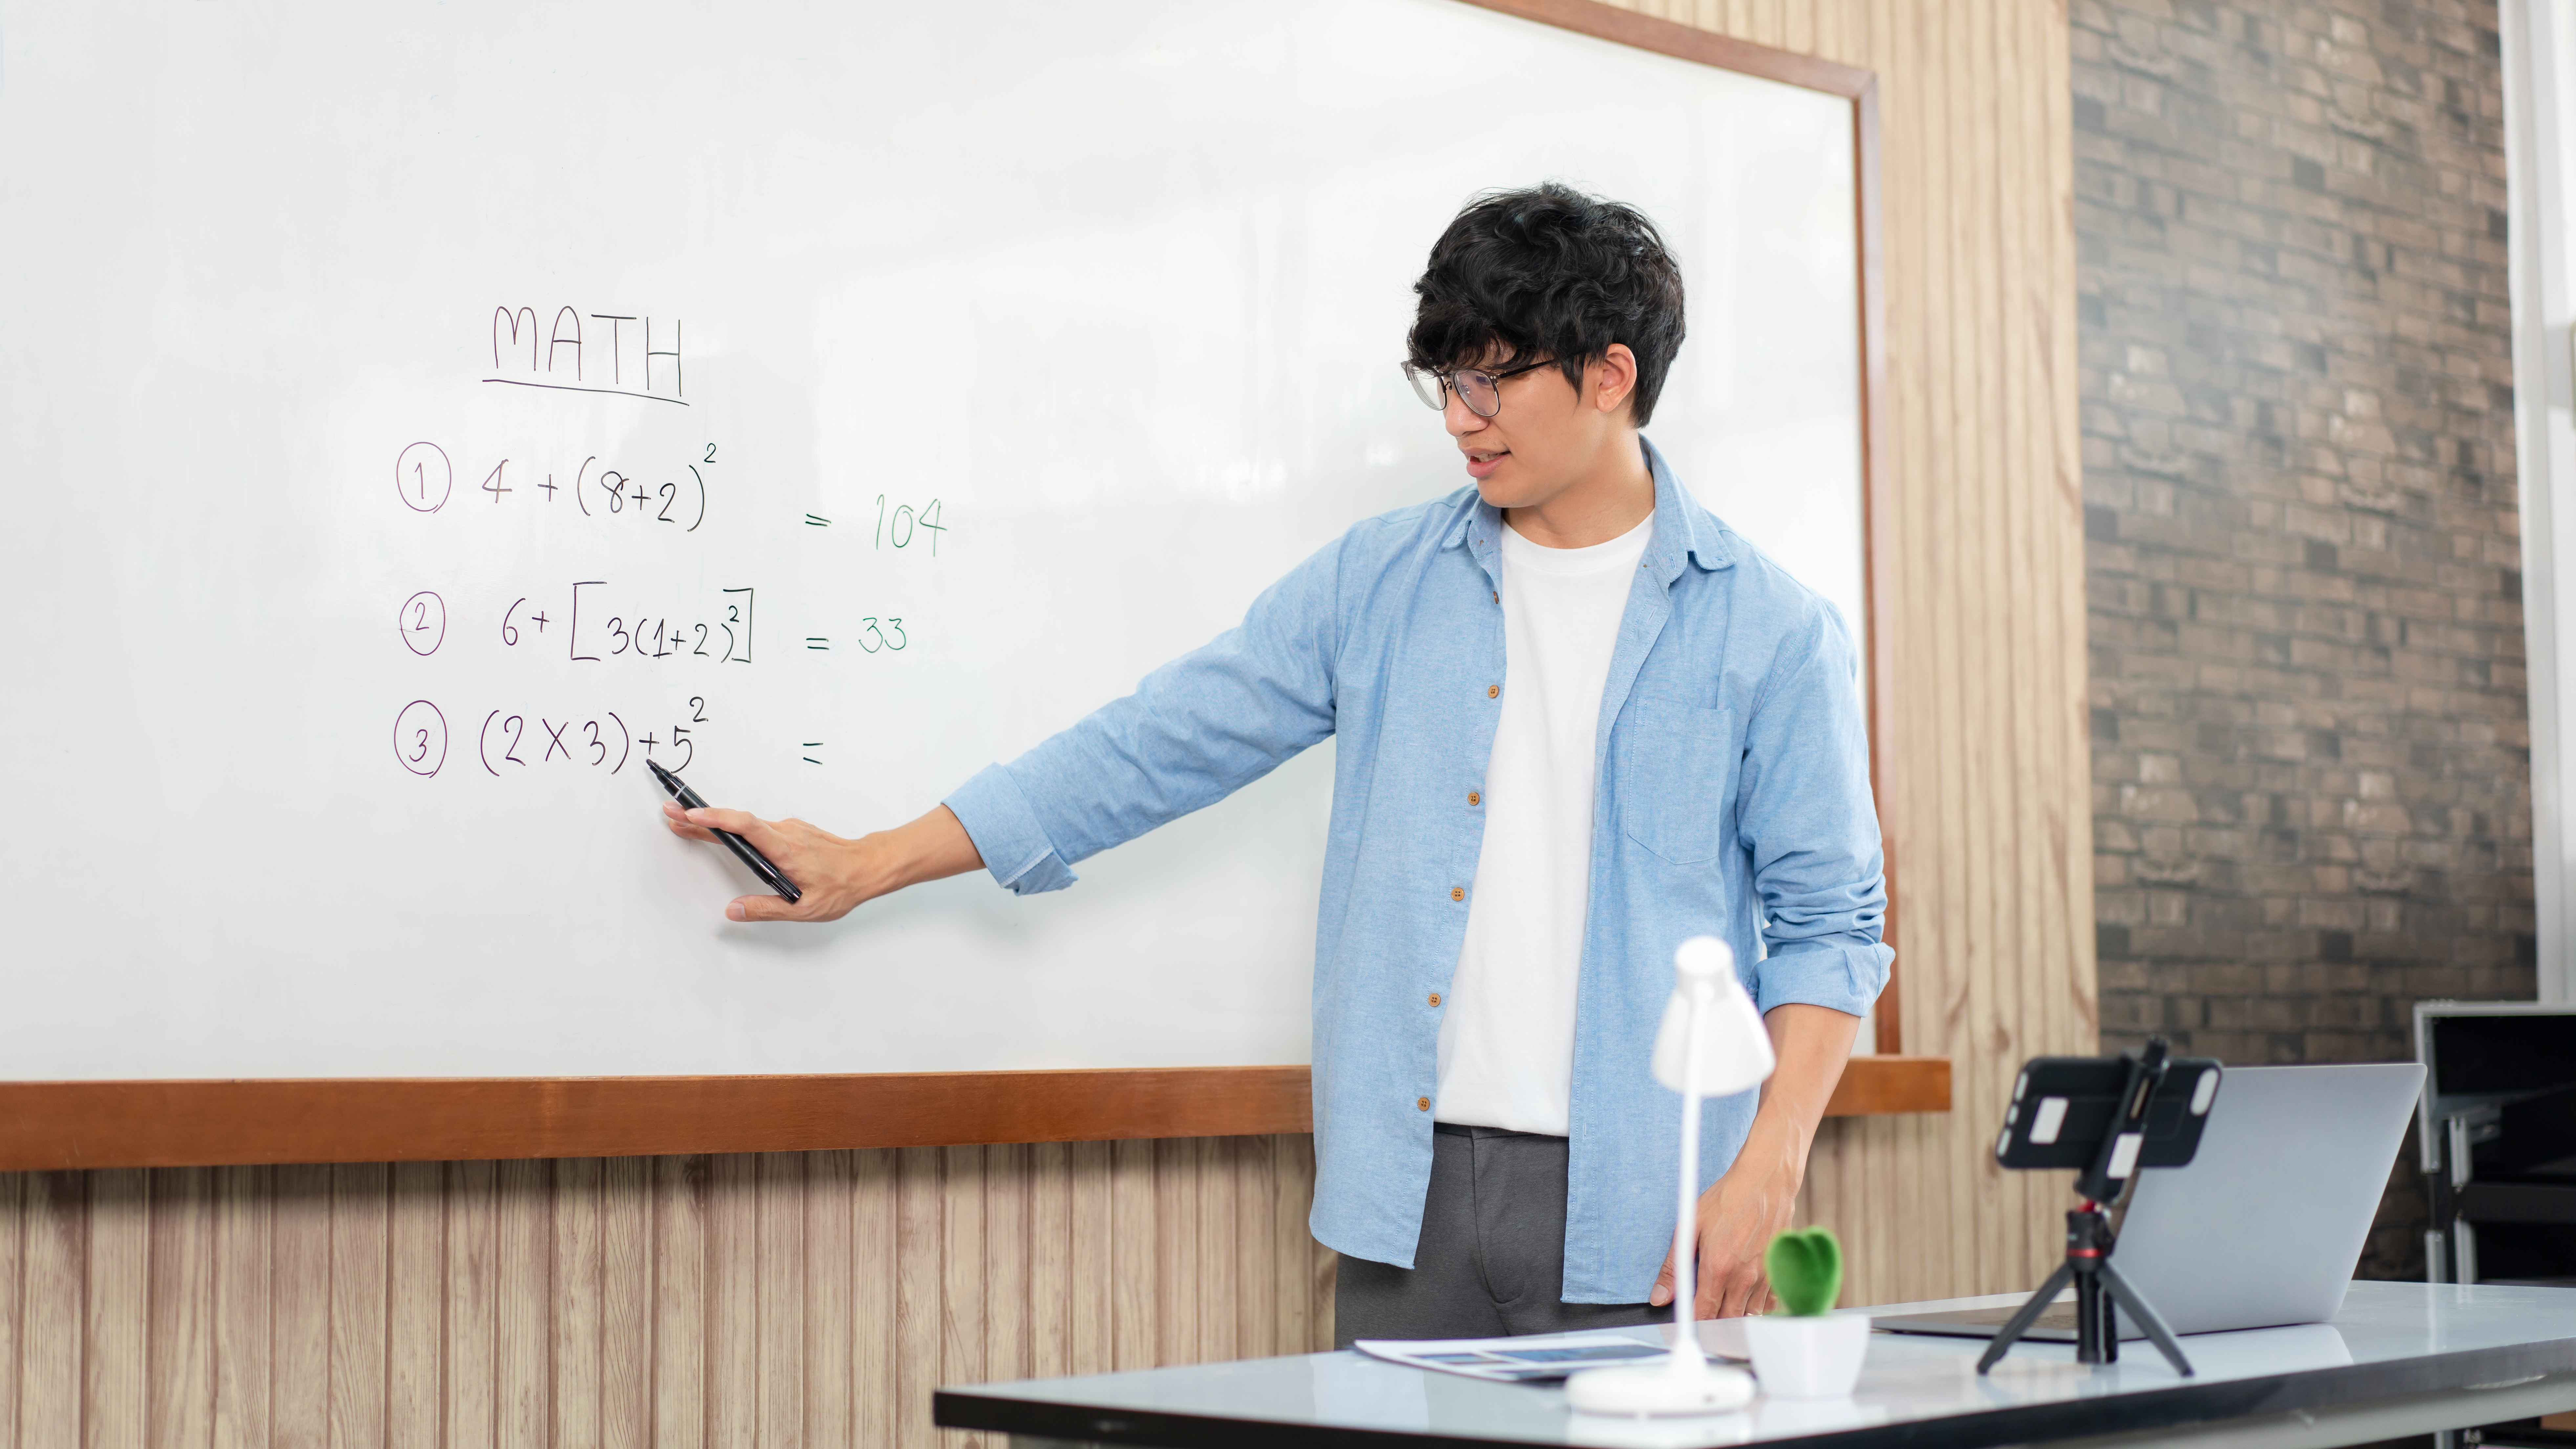 Male tutor standing in front of whiteboard and writing math equations